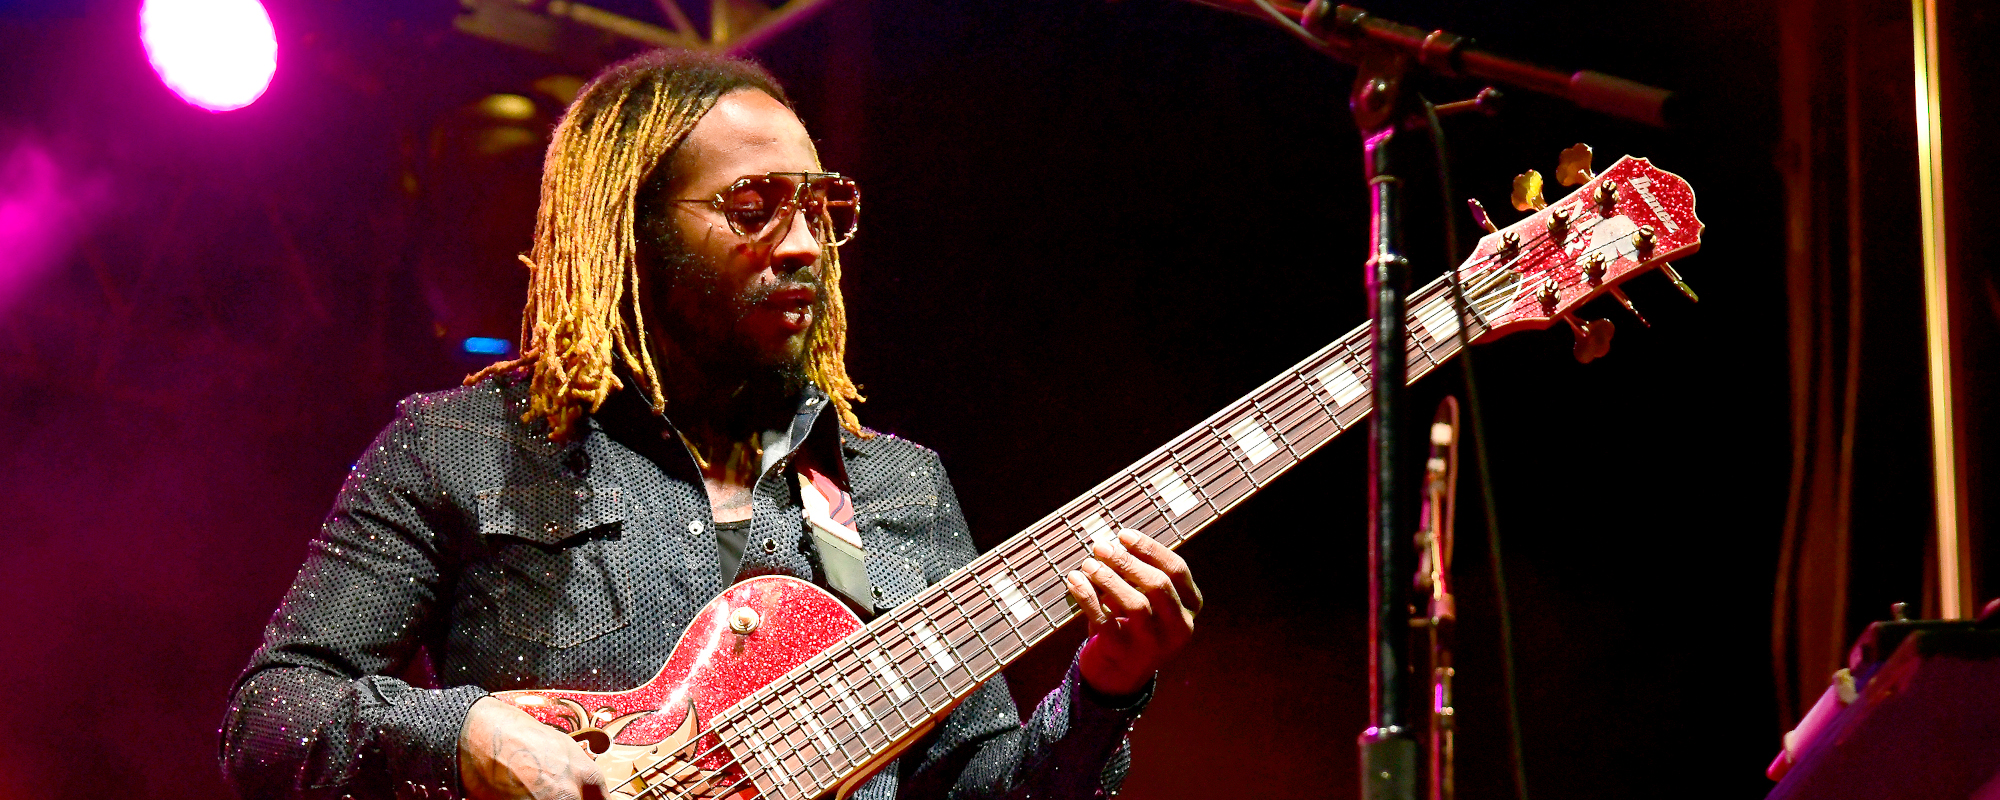 Thundercat and Tame Impala Join Forces for Epic New Single